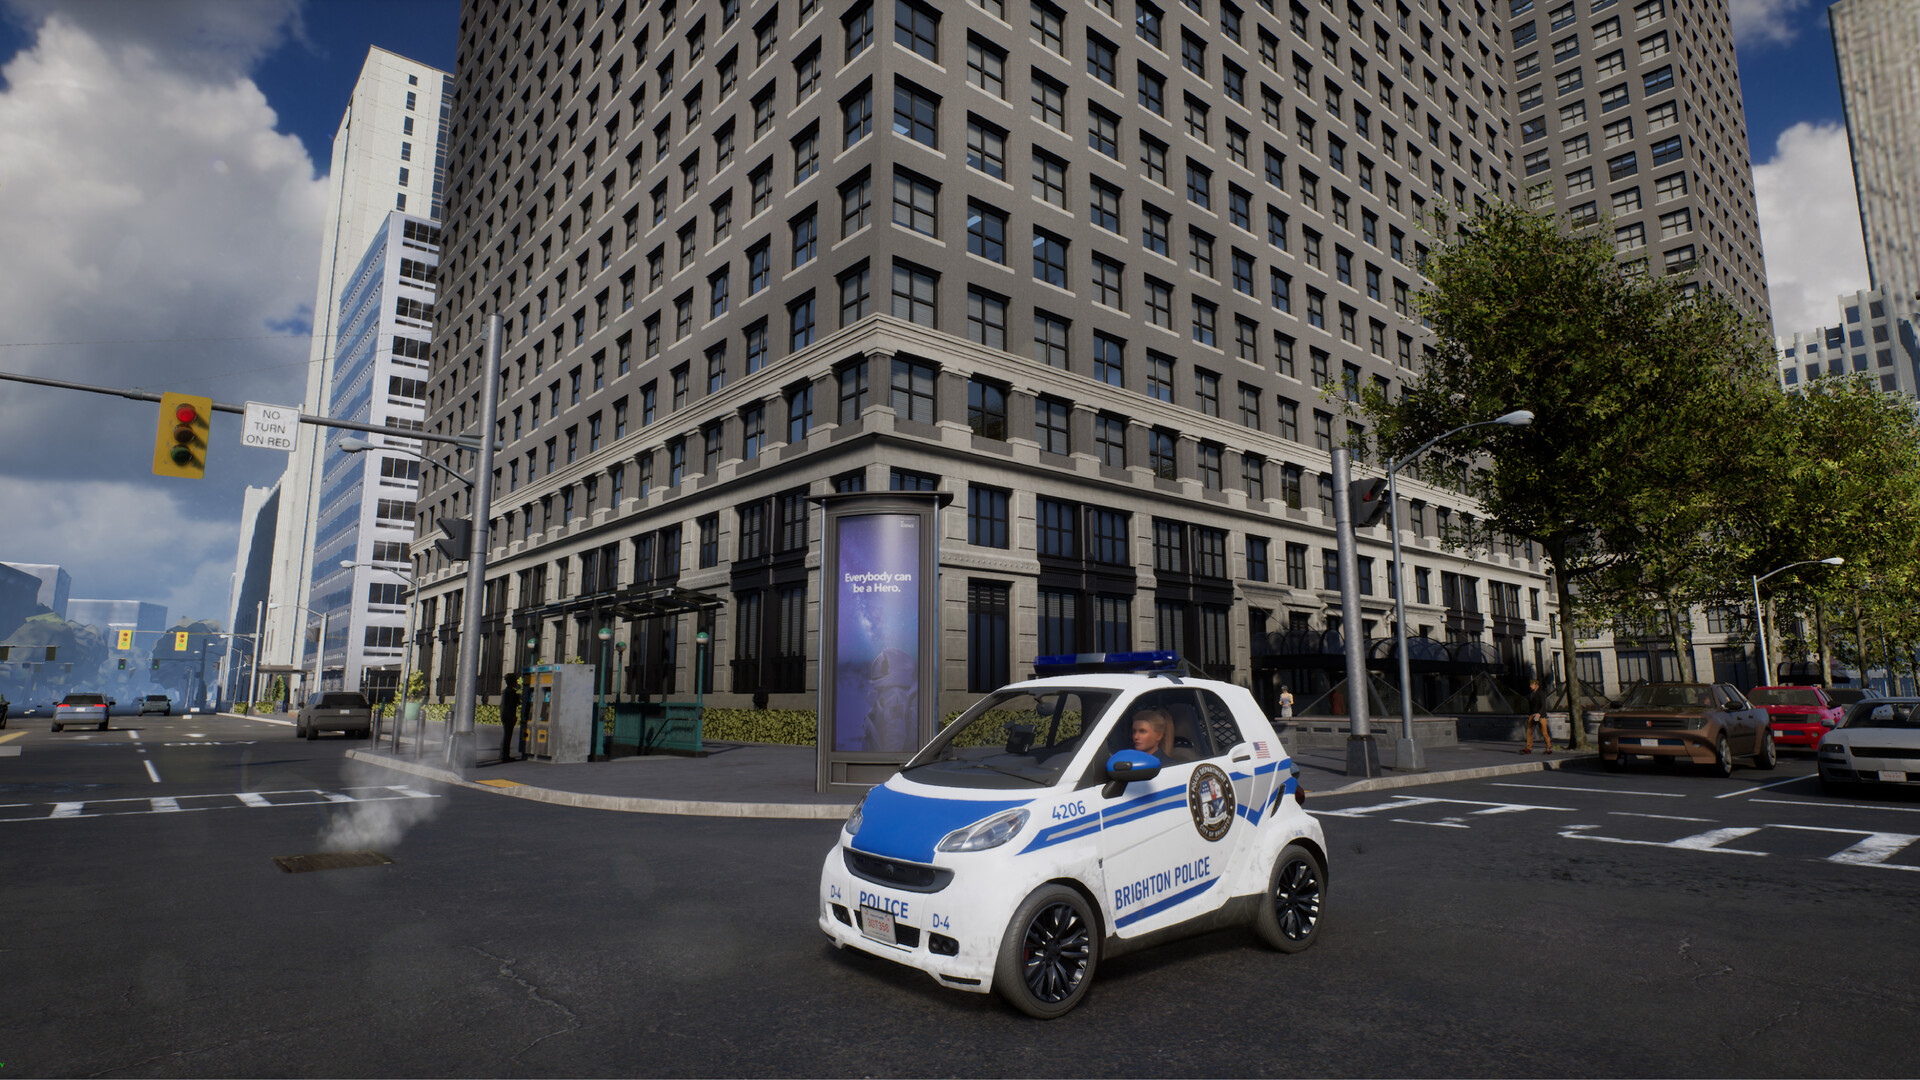 Police Simulator: Patrol Officers: Compact Police Vehicle DLC Featured Screenshot #1